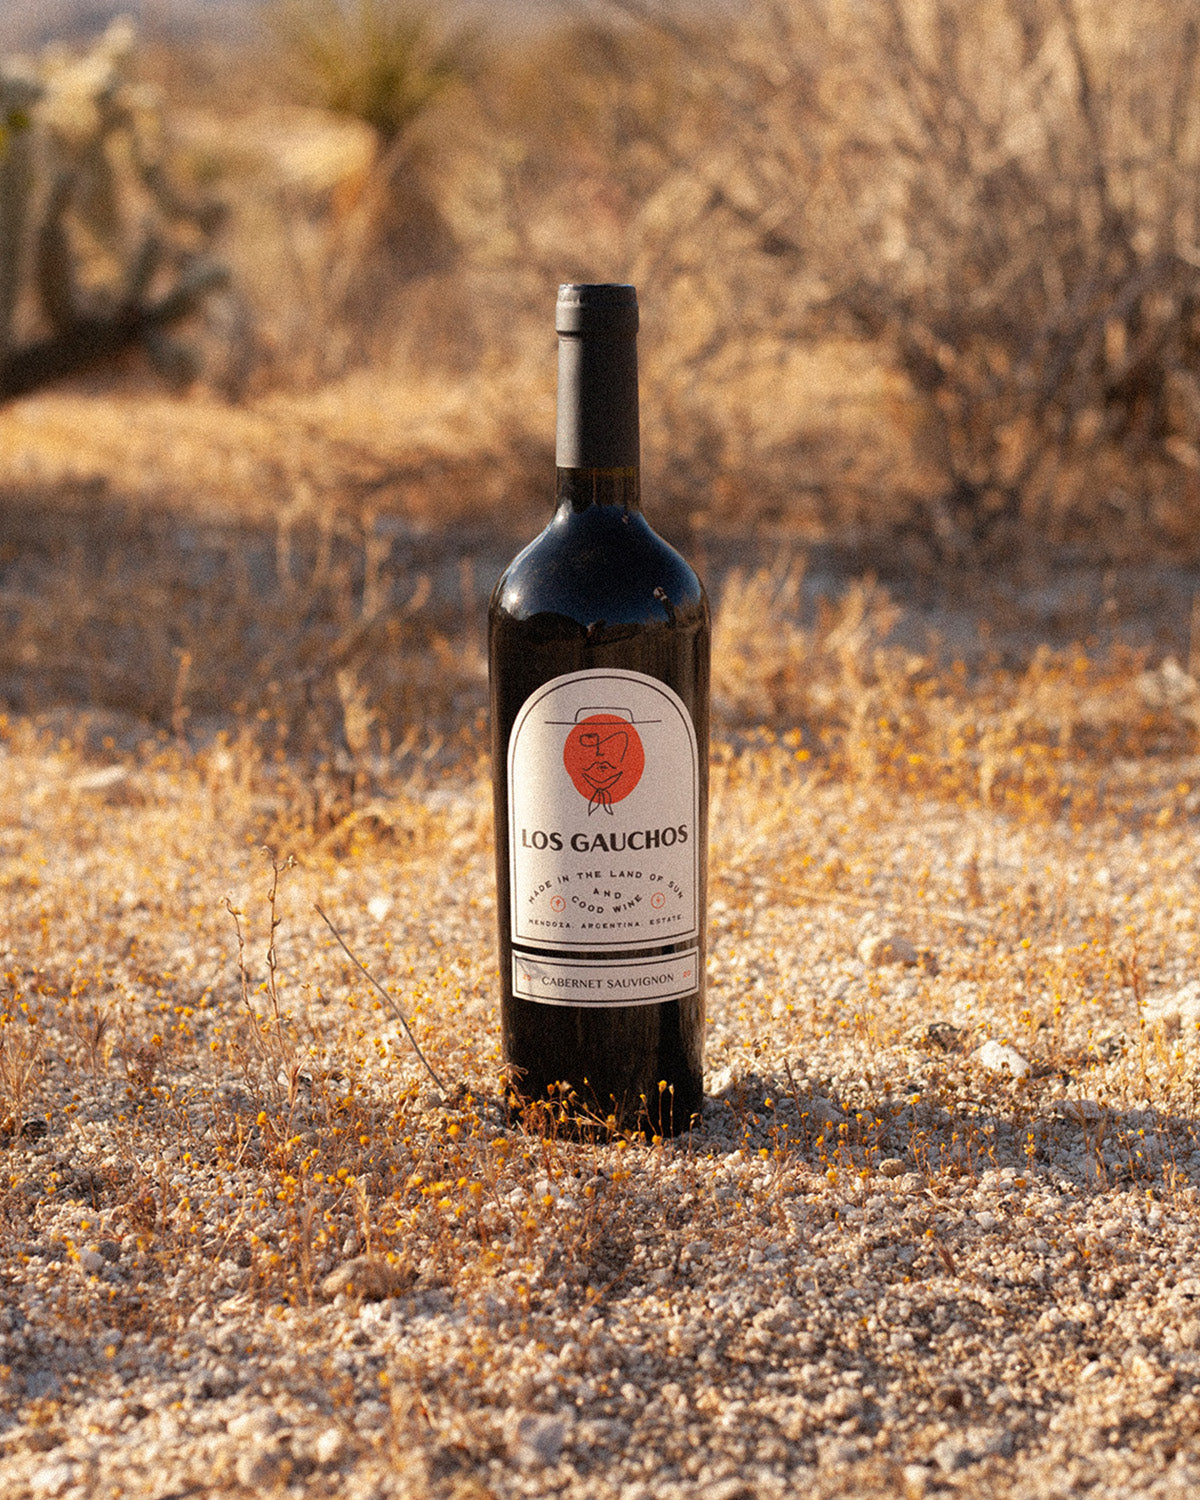 Featured product image displaying Los Gaucho's Cabernet Sauvignon